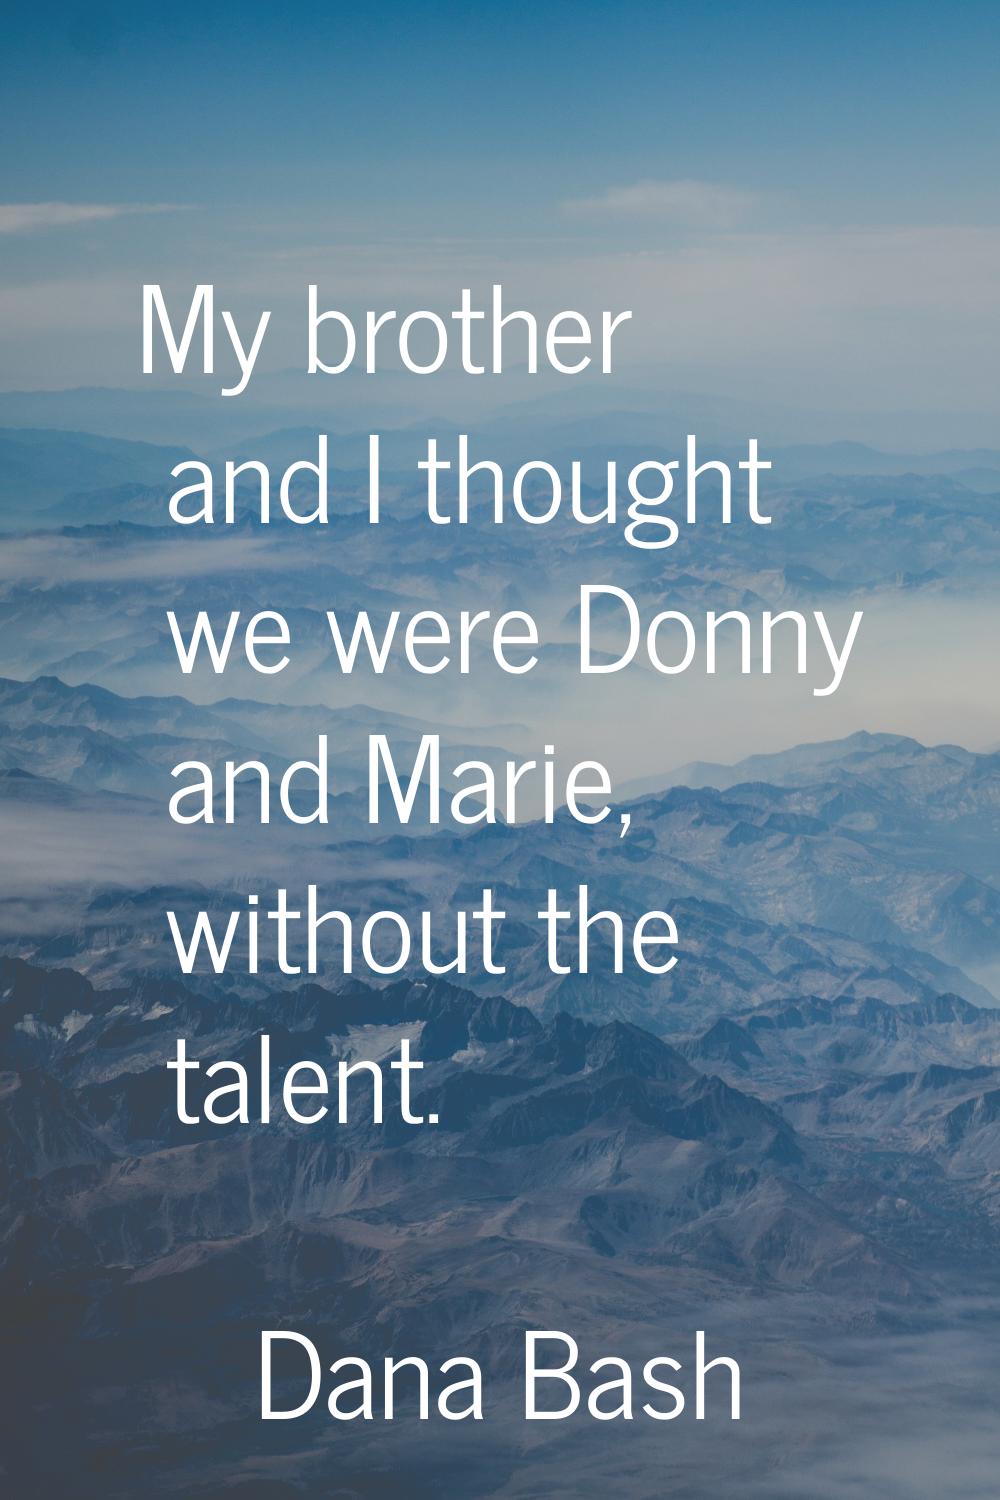 My brother and I thought we were Donny and Marie, without the talent.